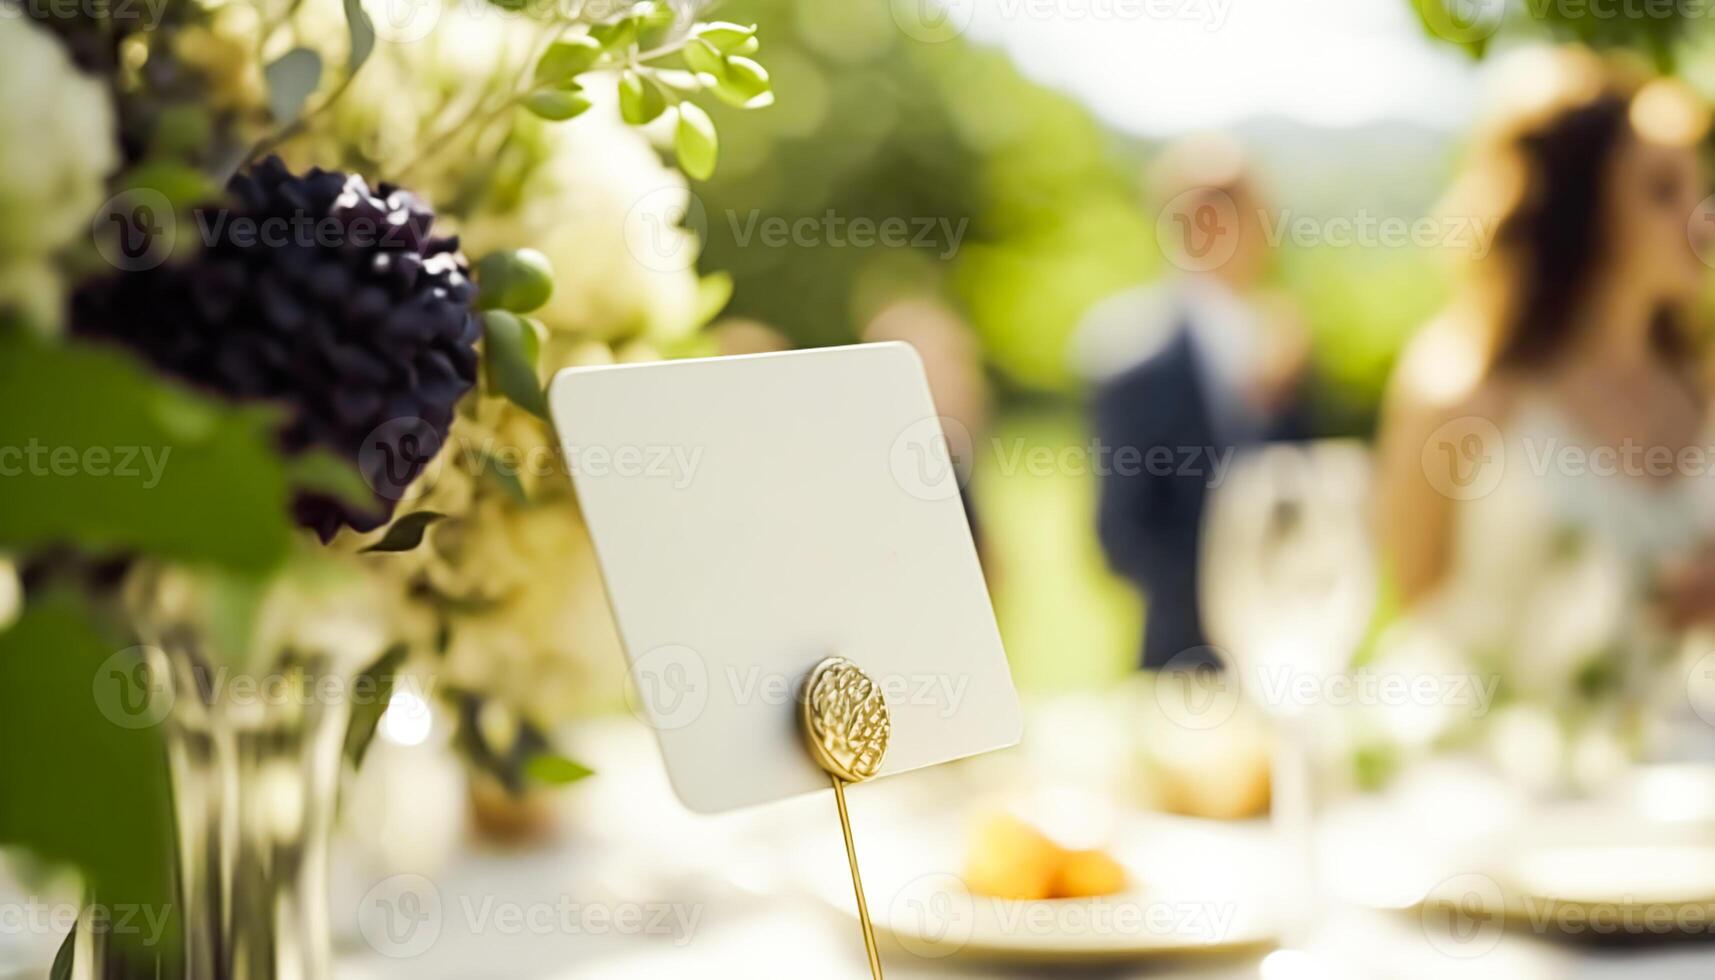 Card as part of wedding table decoration, outdoor venue. photo